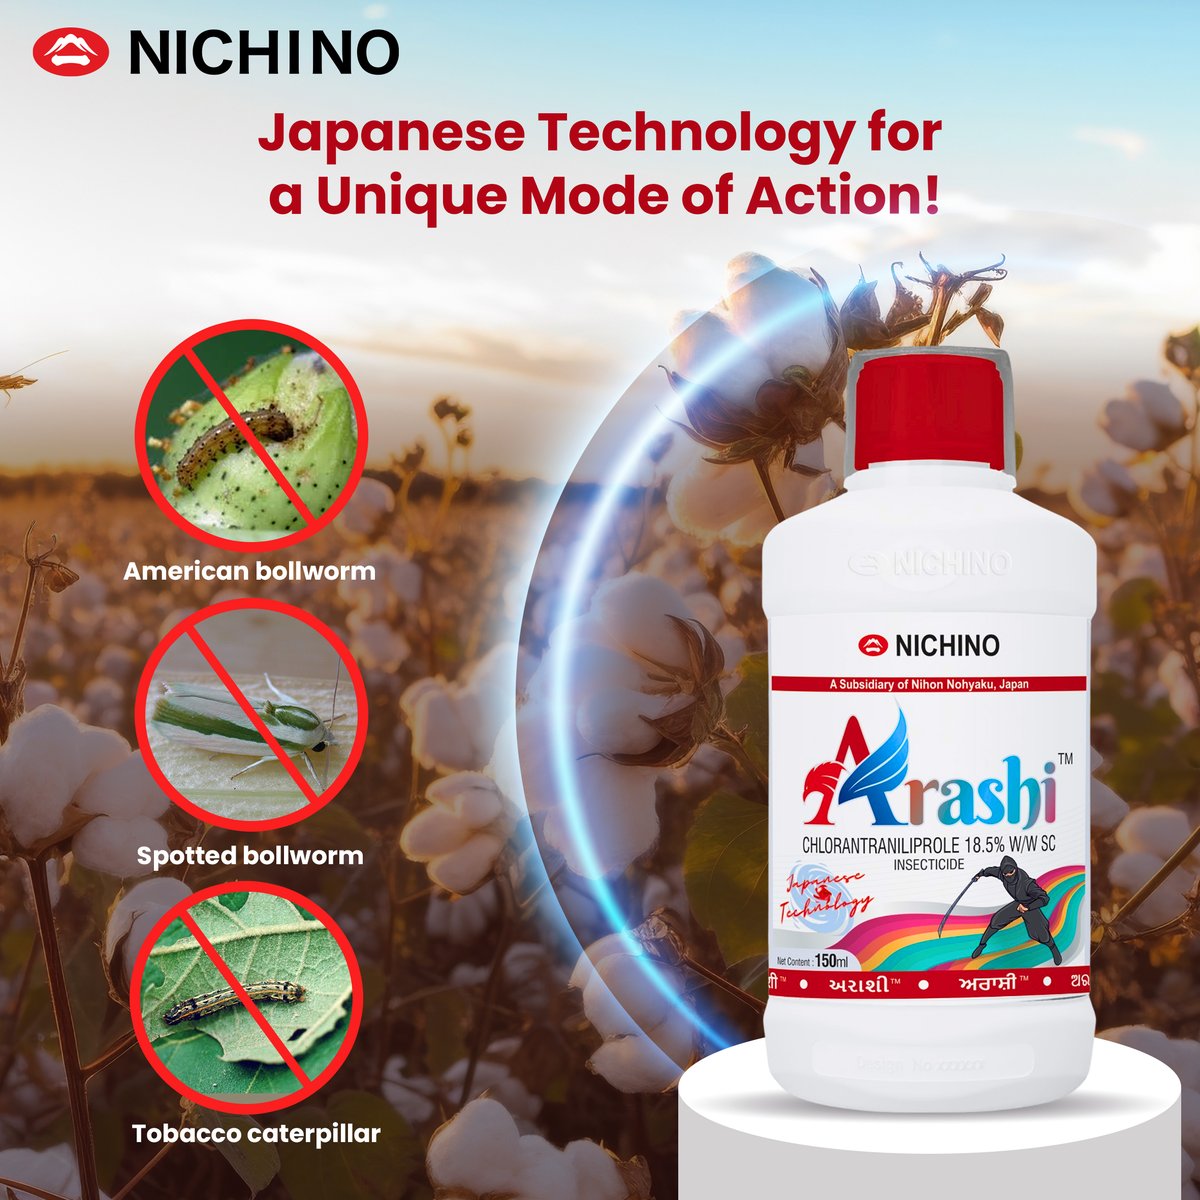 Defend your crop from pests by using Arashi to keep crops safe.

#arashi #PestControl #crop #innovation #naturalsolution #NichinoIndia